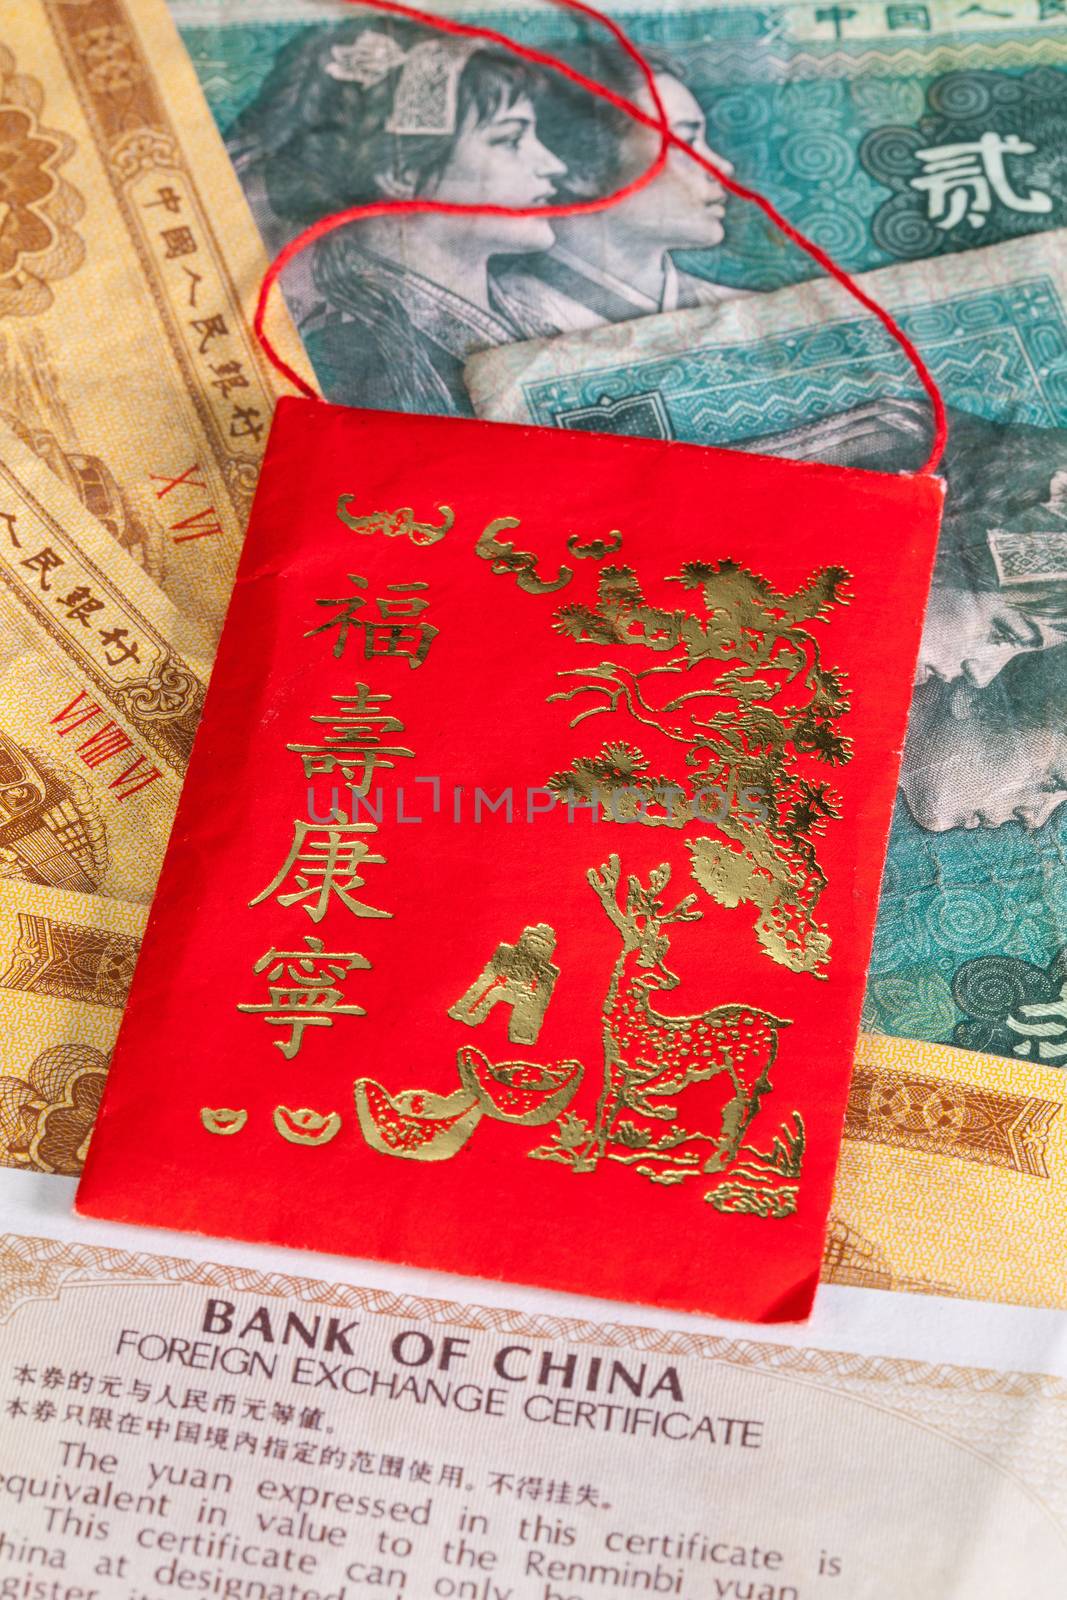 Typical China red envelope and different China banknotes